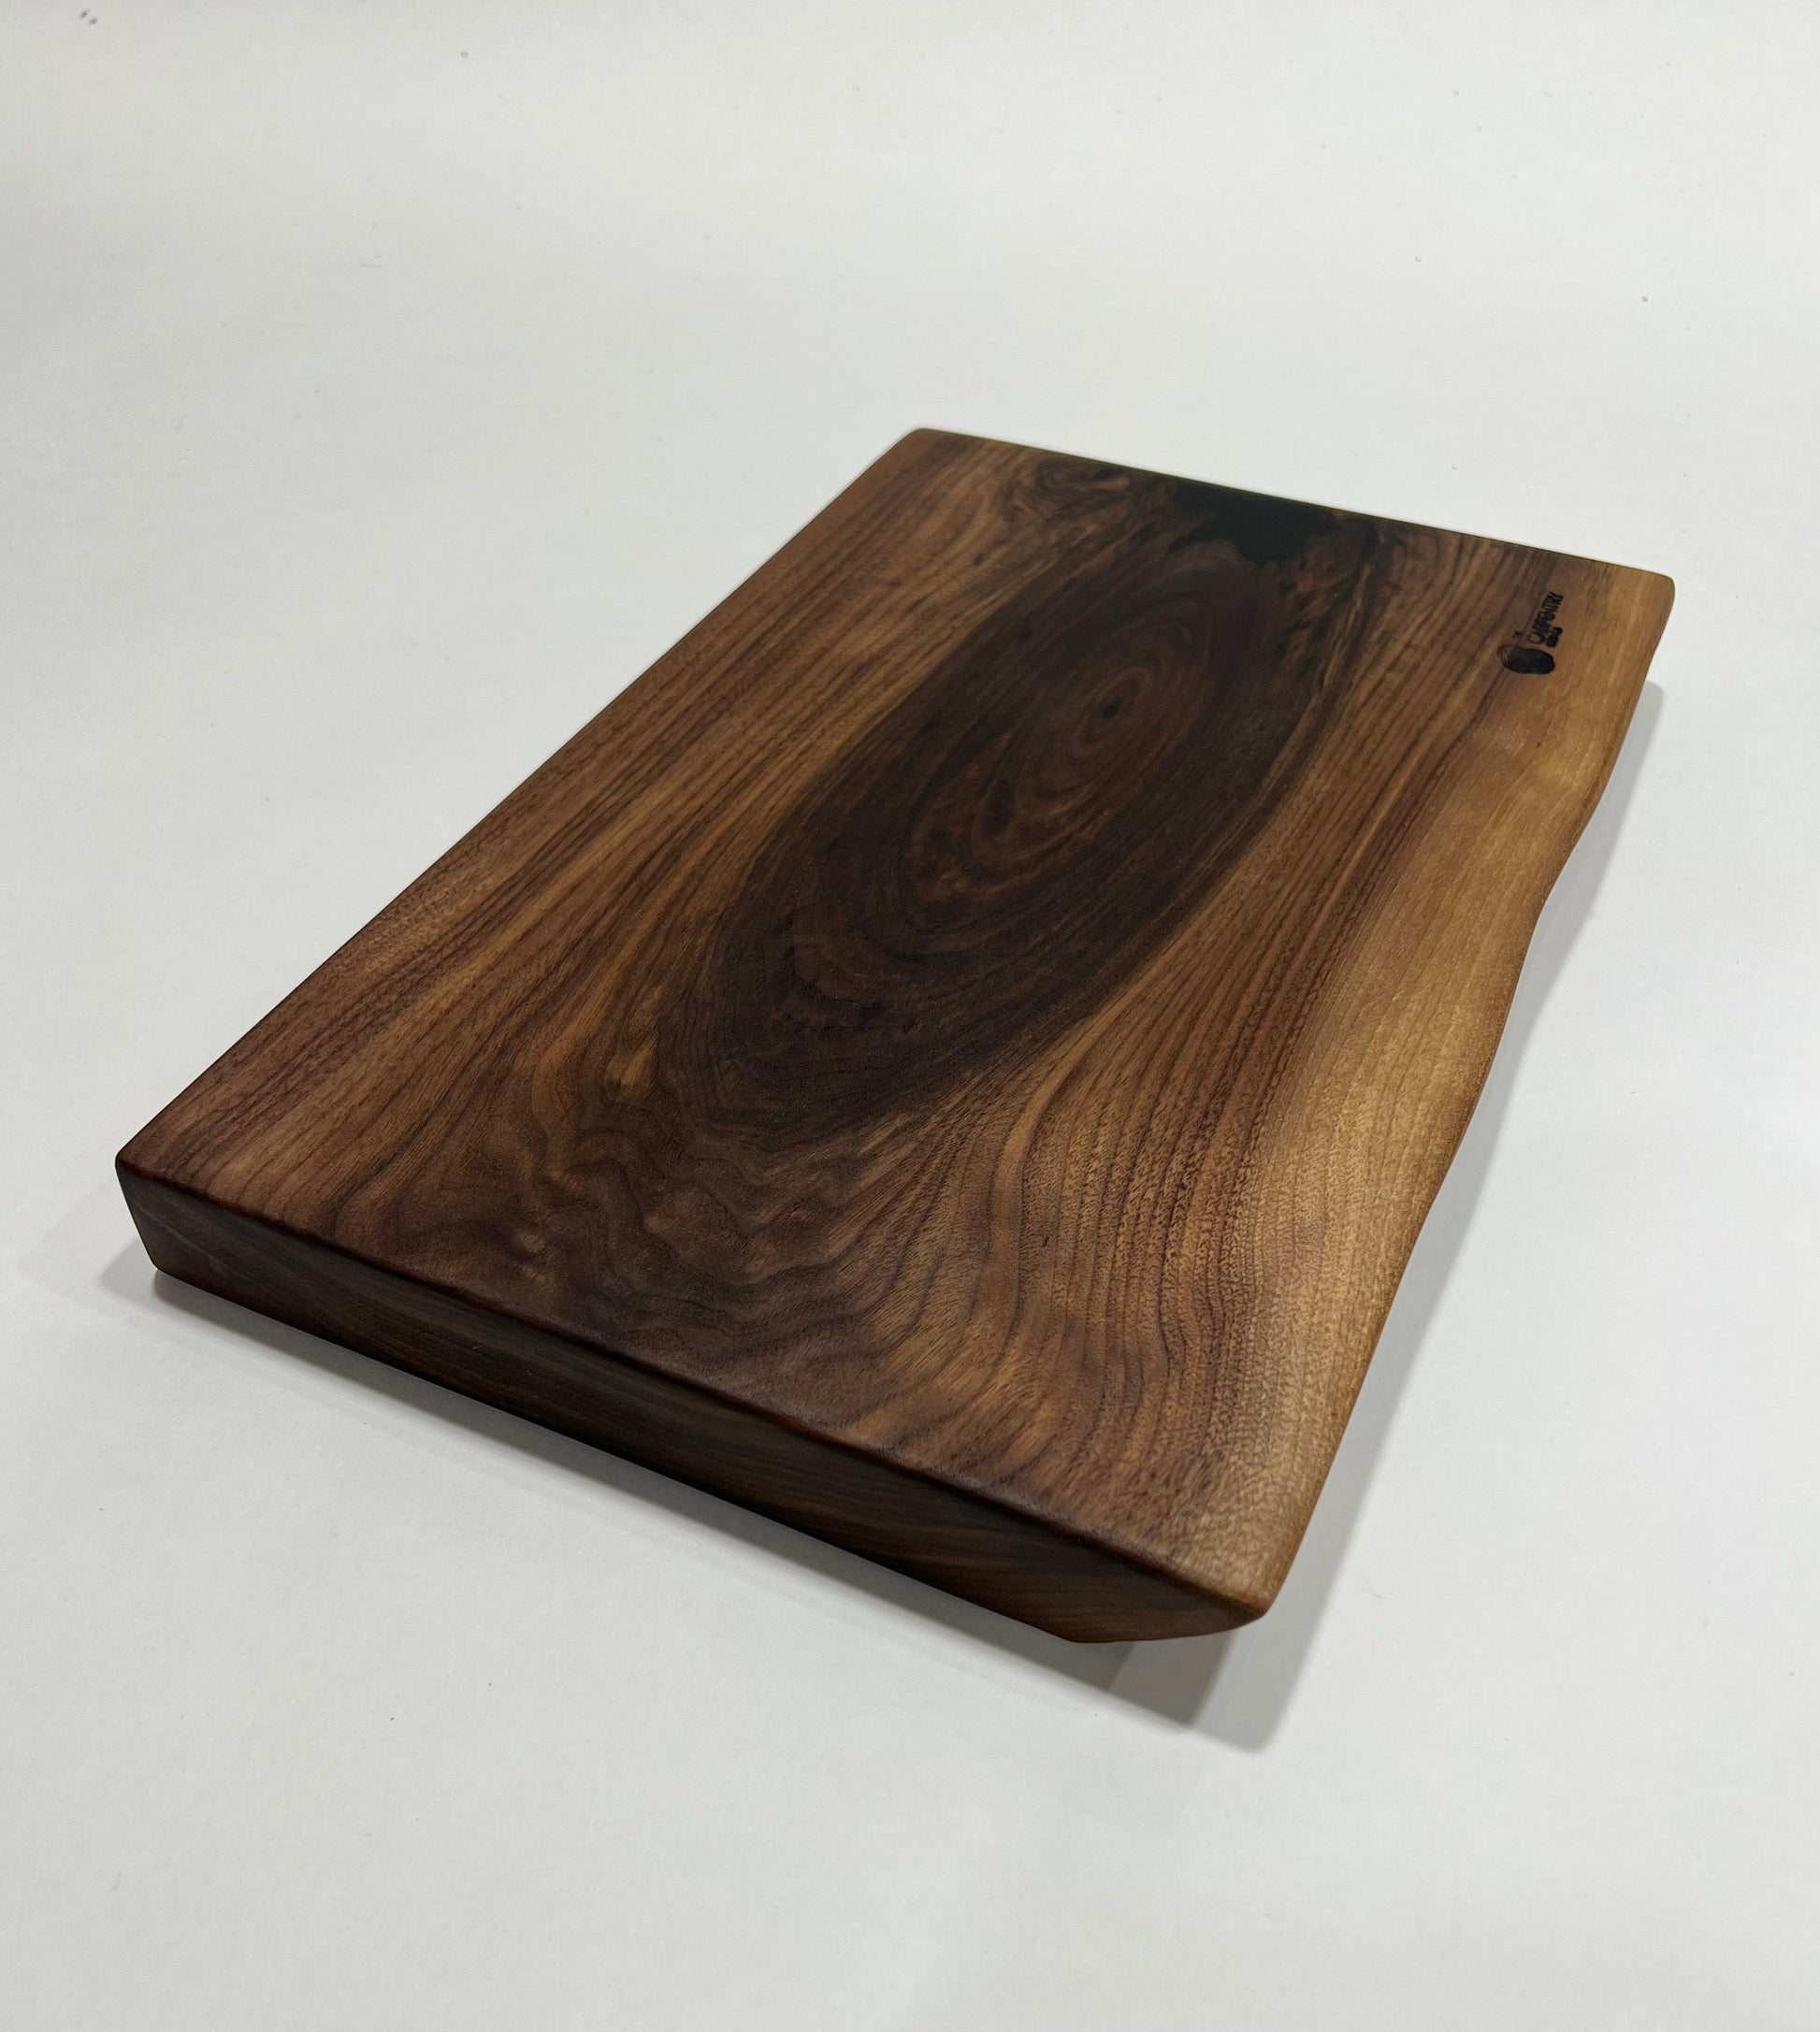 Solid Walnut Charcuterie Board and Removable/Dishwasher Safe Richlite Black Cutting  Board - Moslow Wood Products (Virginia)